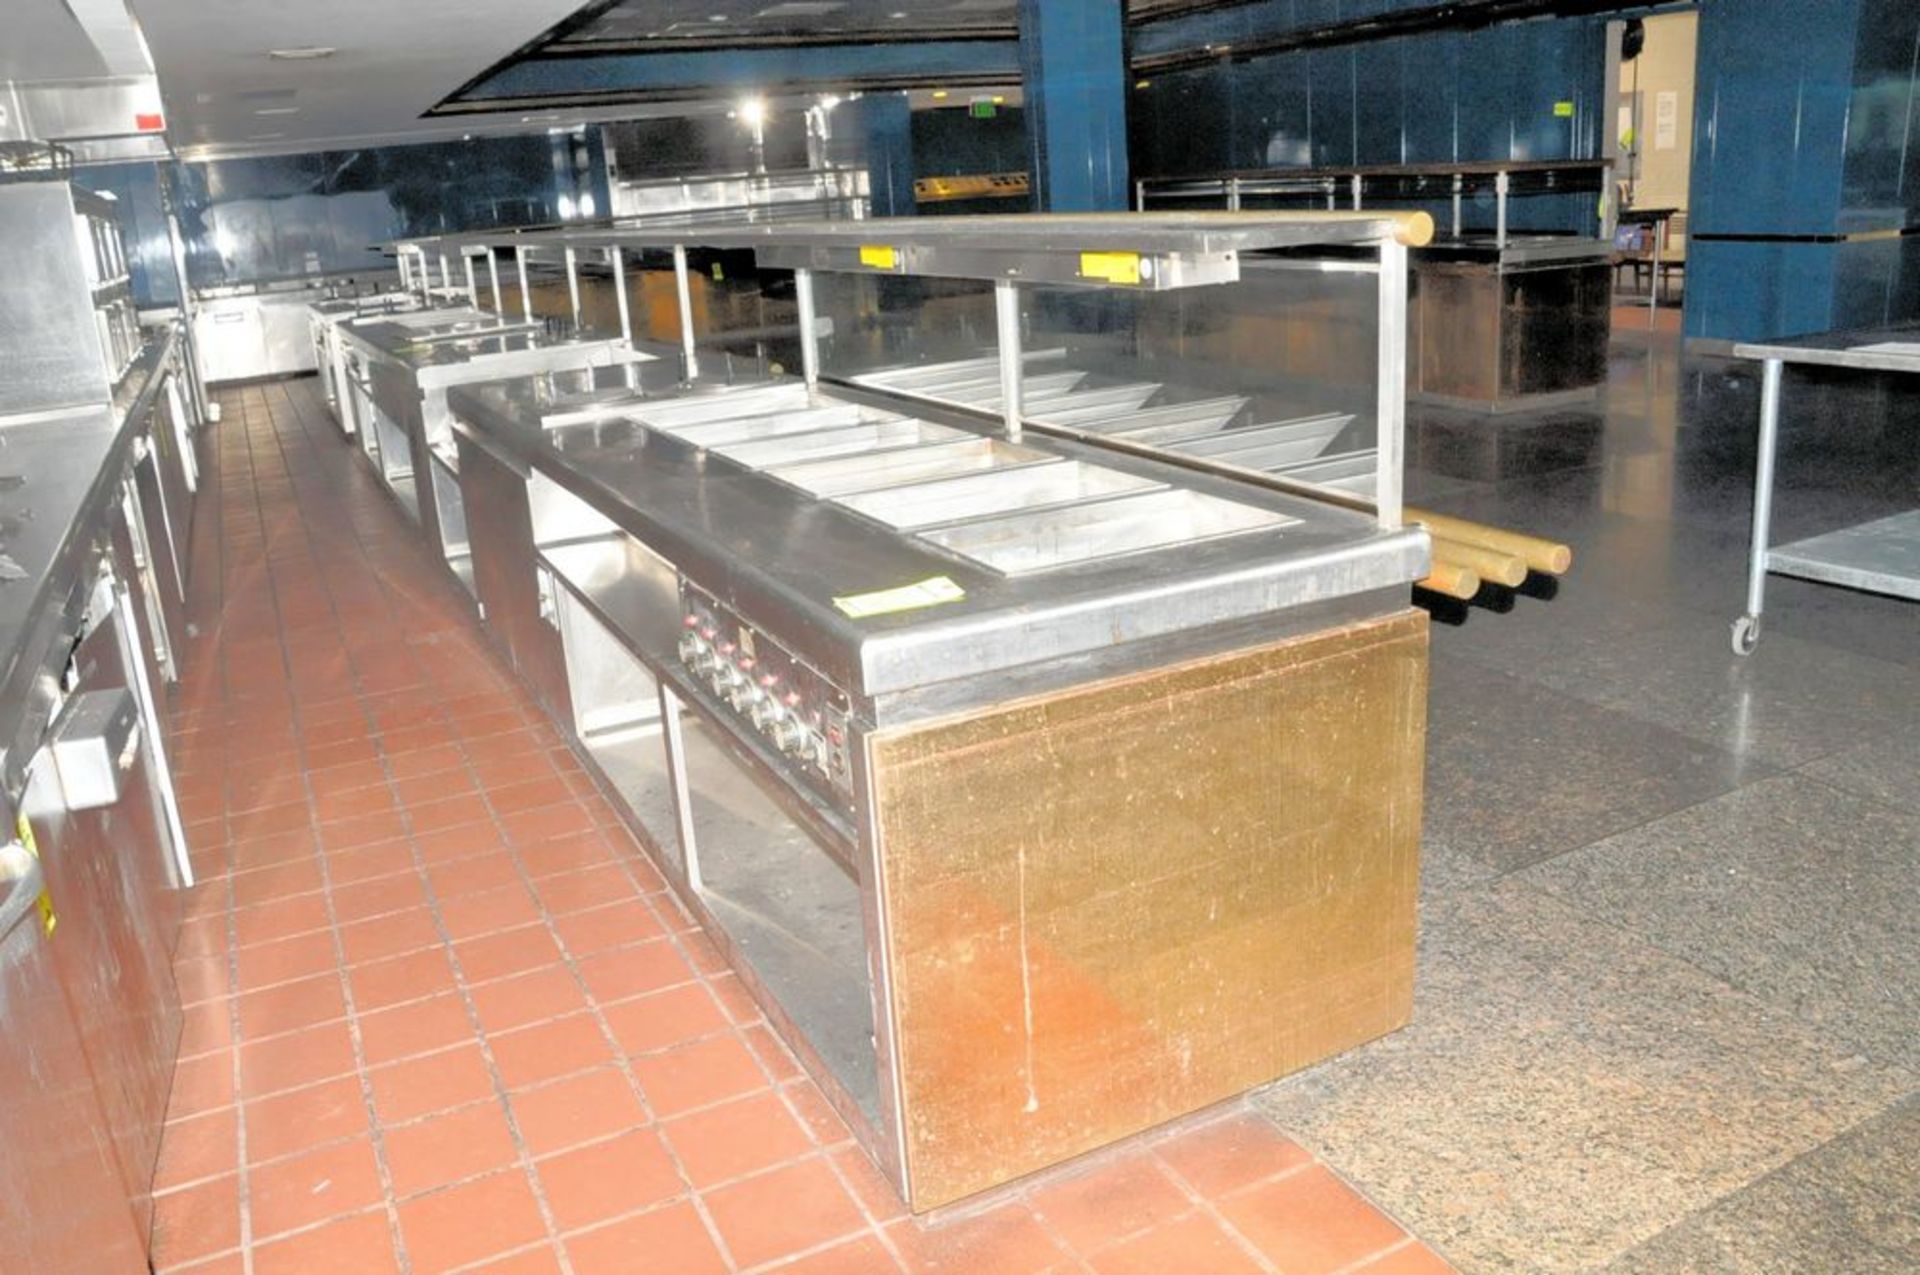 Hobart Stainless Steel Hot Foods Server System, 3' x 39' 6", (1) Unit Has 3-Compartments and (2) - Image 3 of 13